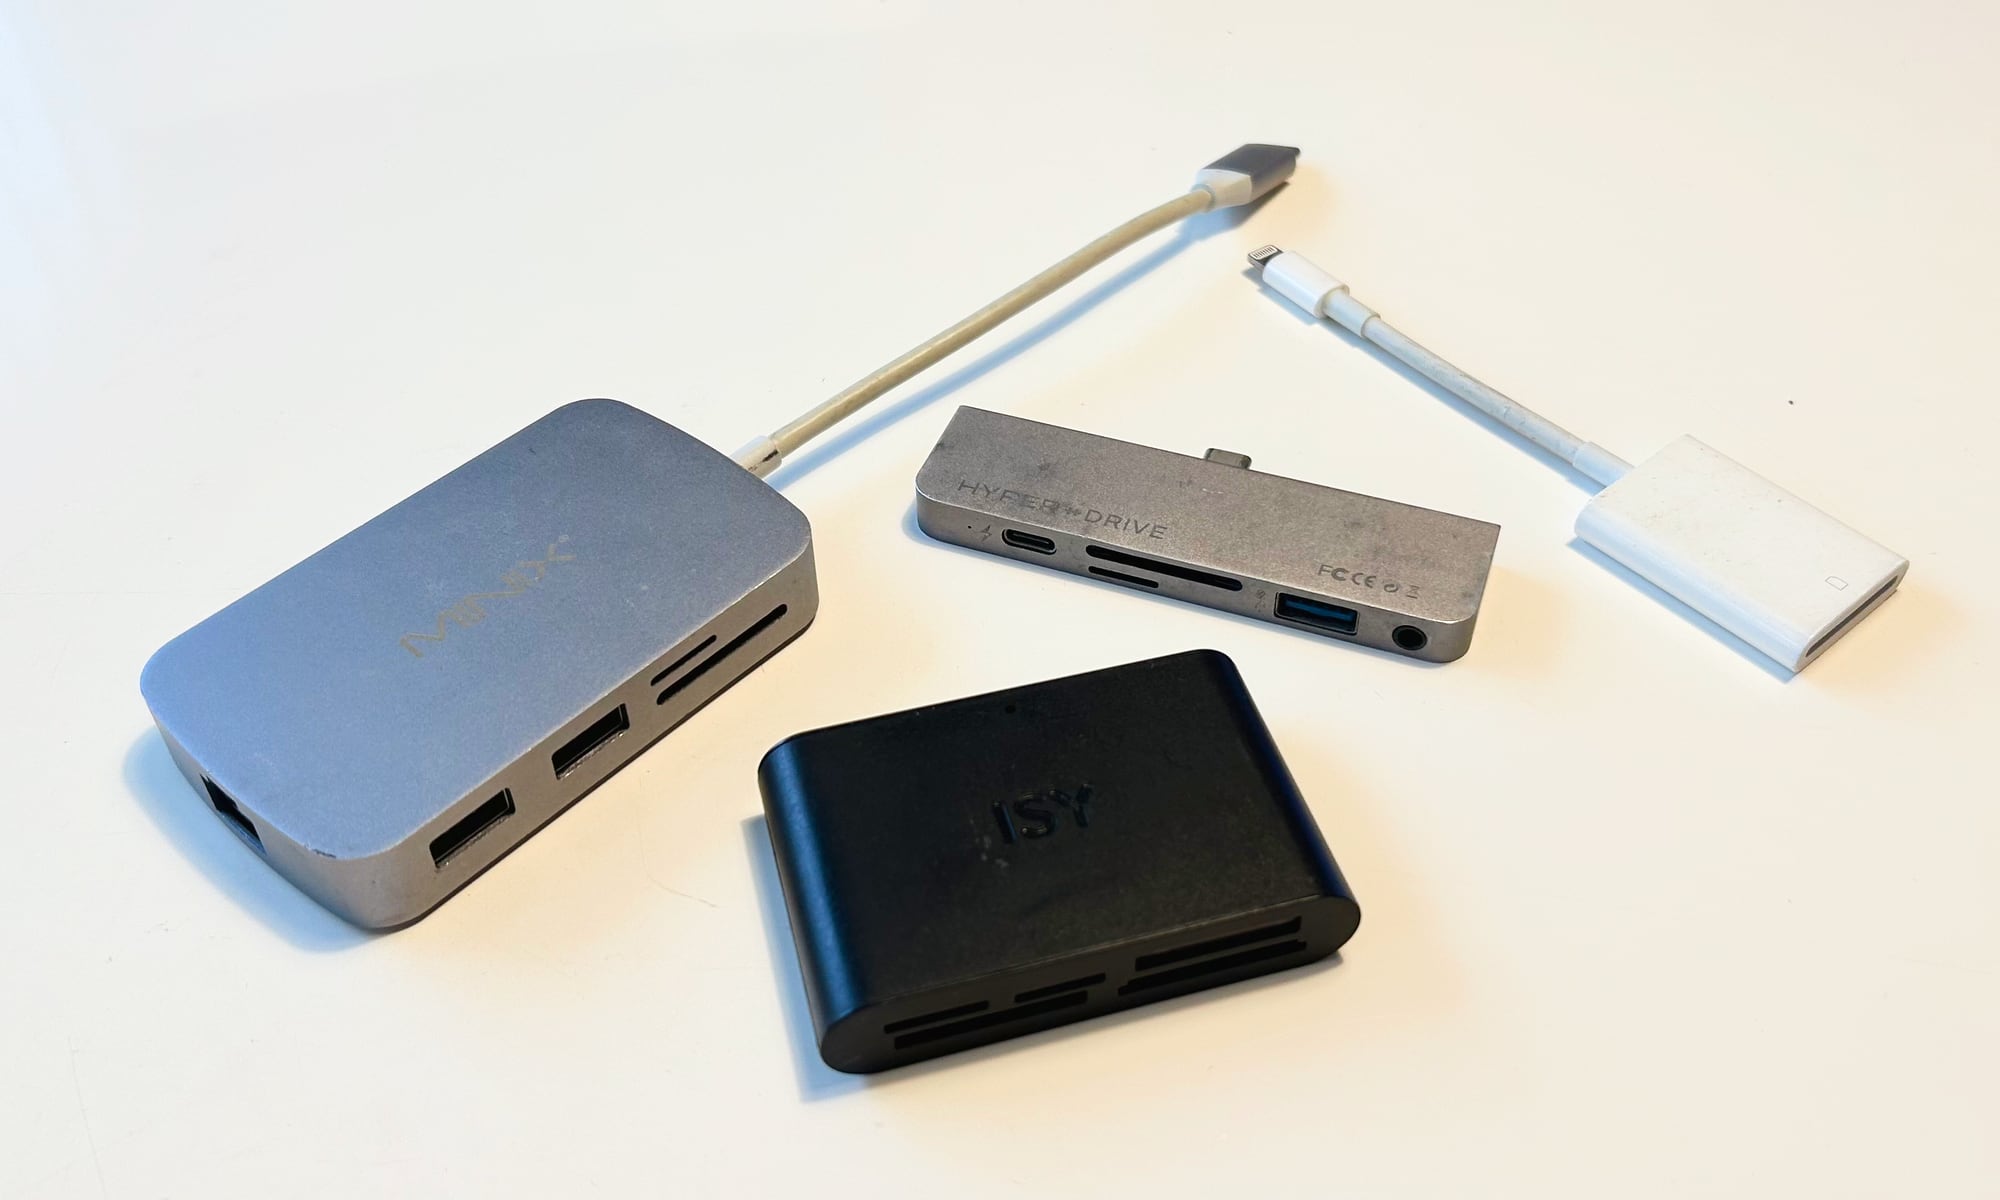 A selection of different card readers